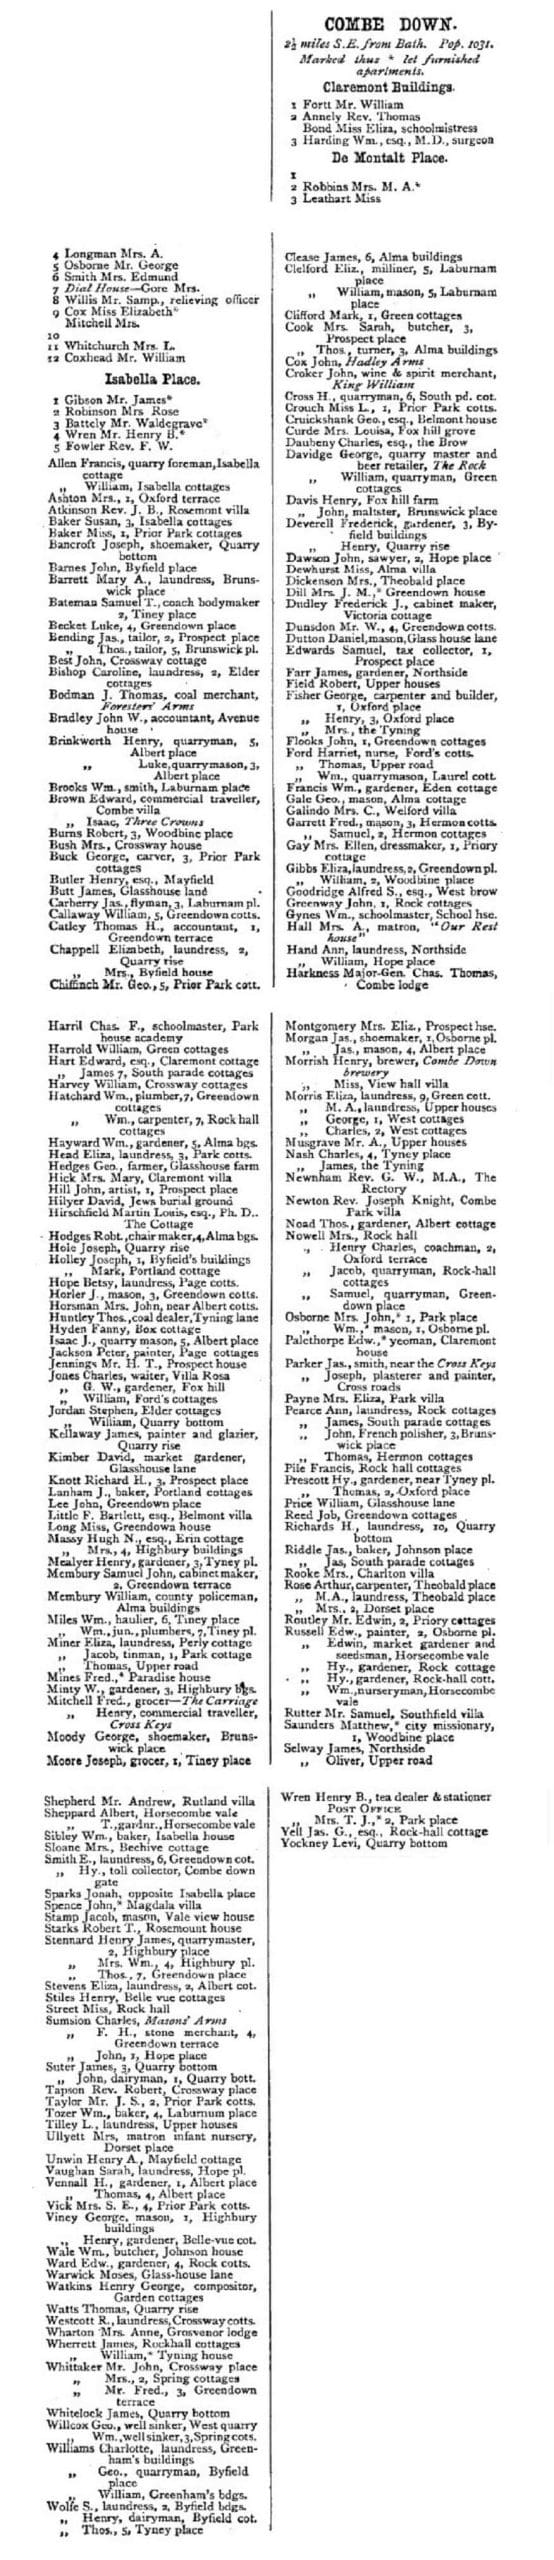 1876 - 77 Post Office Directory for Combe Down